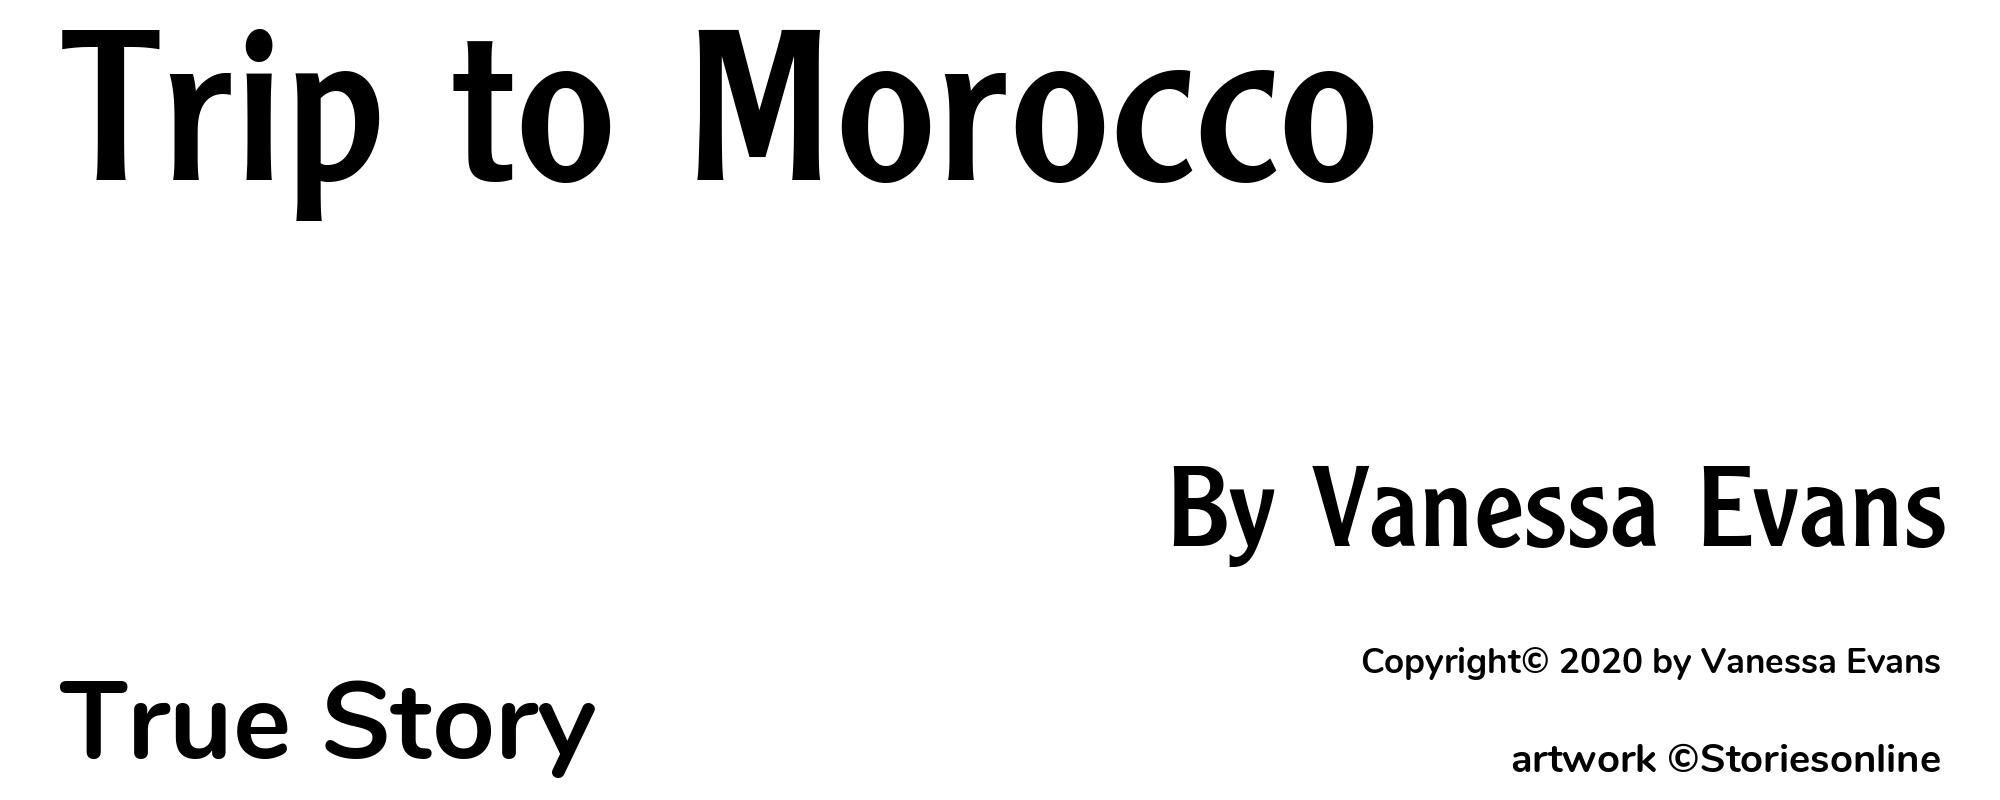 Trip to Morocco - Cover